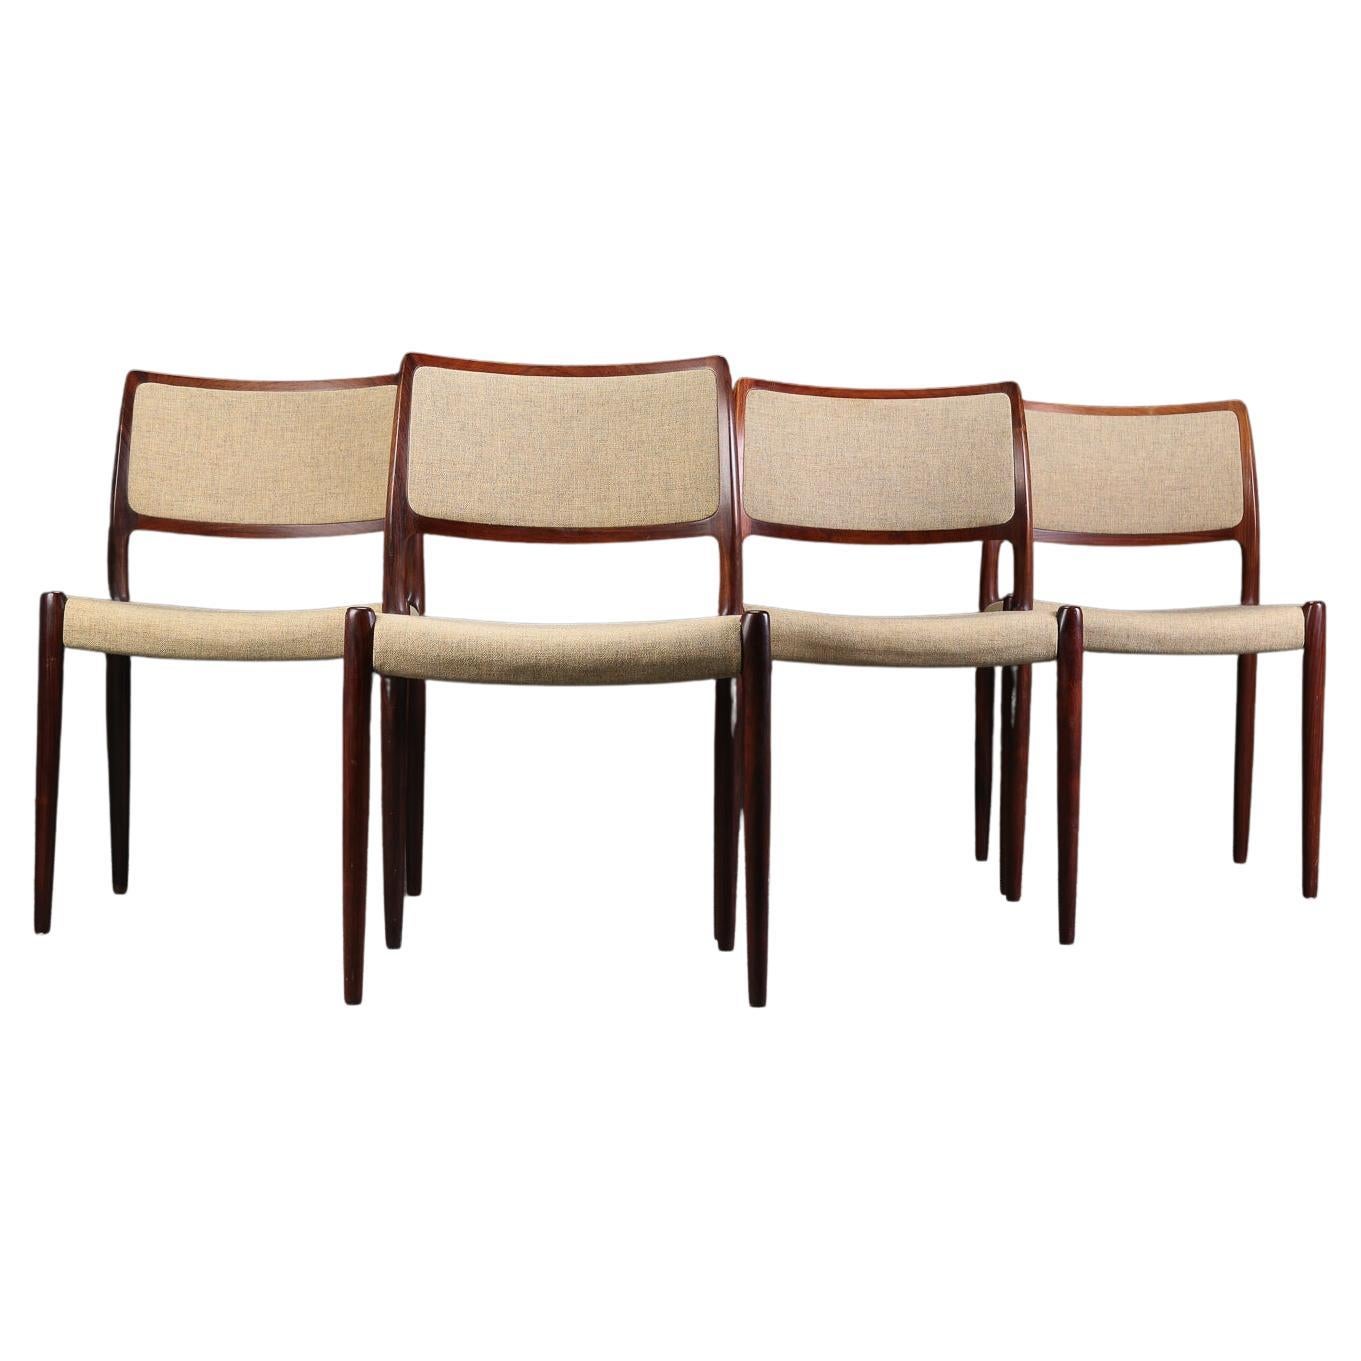 Niels Otto Moller Rosewood Armchair Mod N° 80 Set of 4